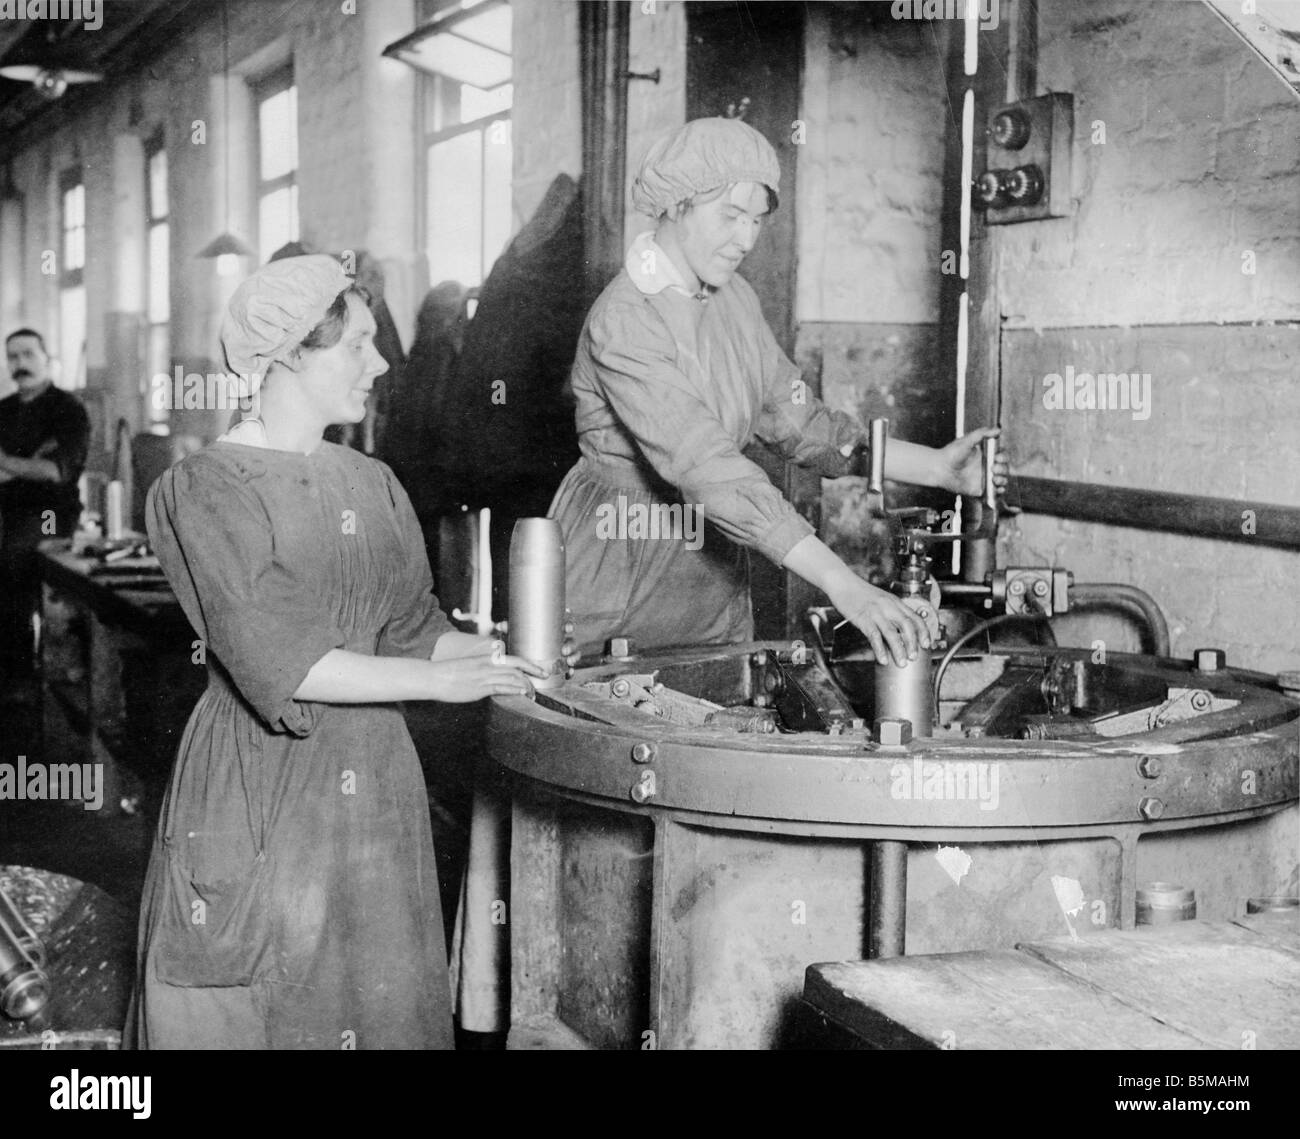 2 G55 W2 1916 3 Women in Ammunition Factory Scot 1916 History World War 1 War economy Society ladies as temporary workers in an Stock Photo